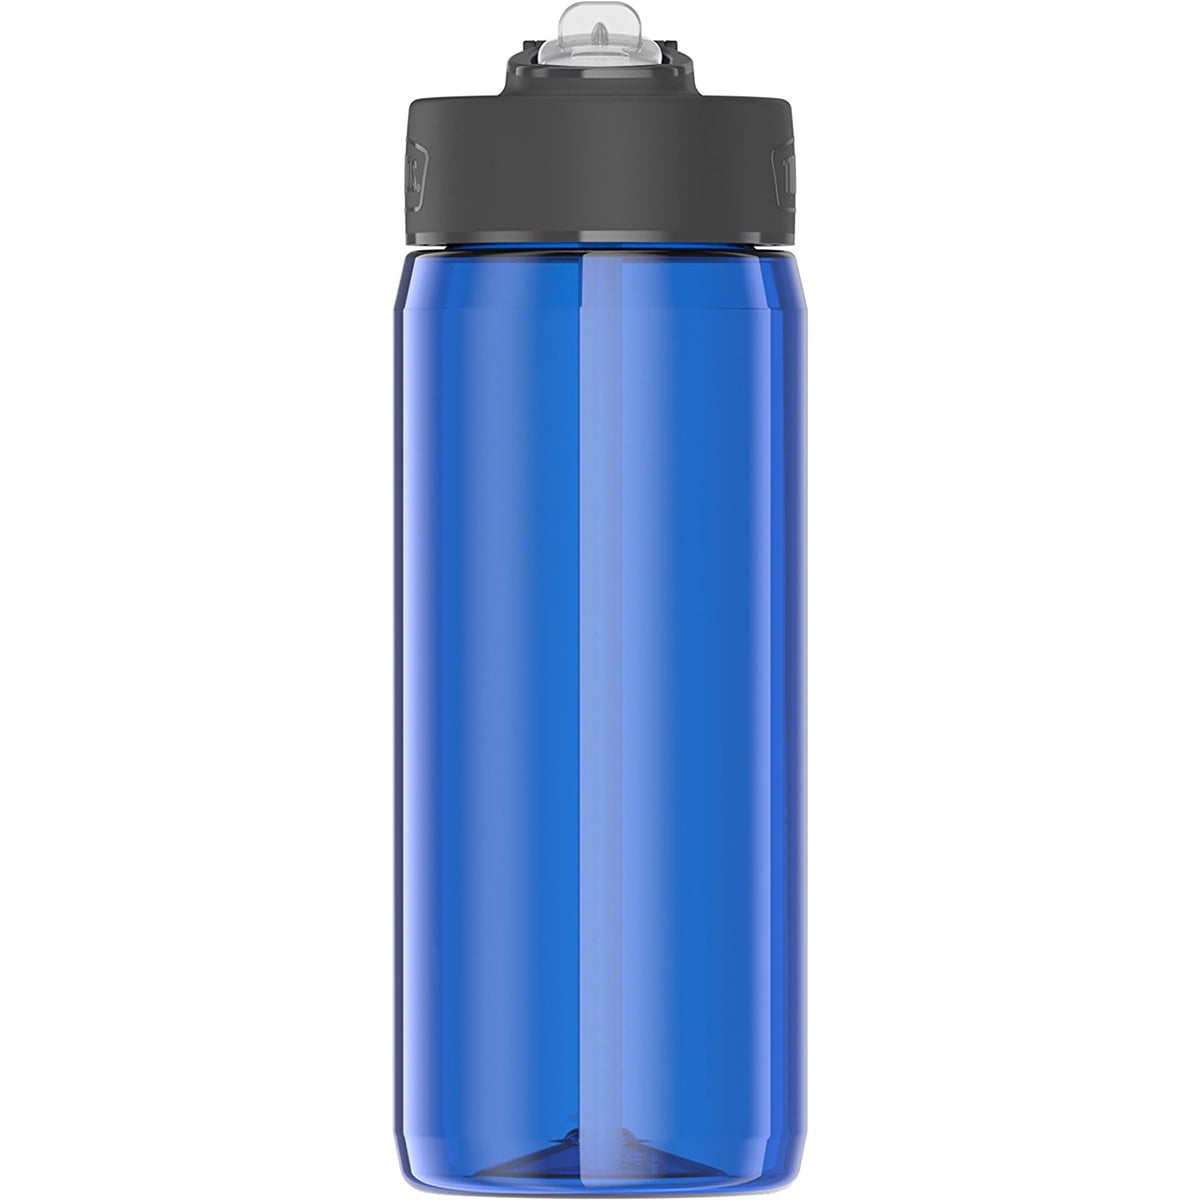 Travel Flask Stainless Steel Steel Bottle for Water Cycling Bottle Donald duck Sport Bottle Outdoor Yoga Camping Hiking disneylwold Donald duck Water Bottle 18 Oz